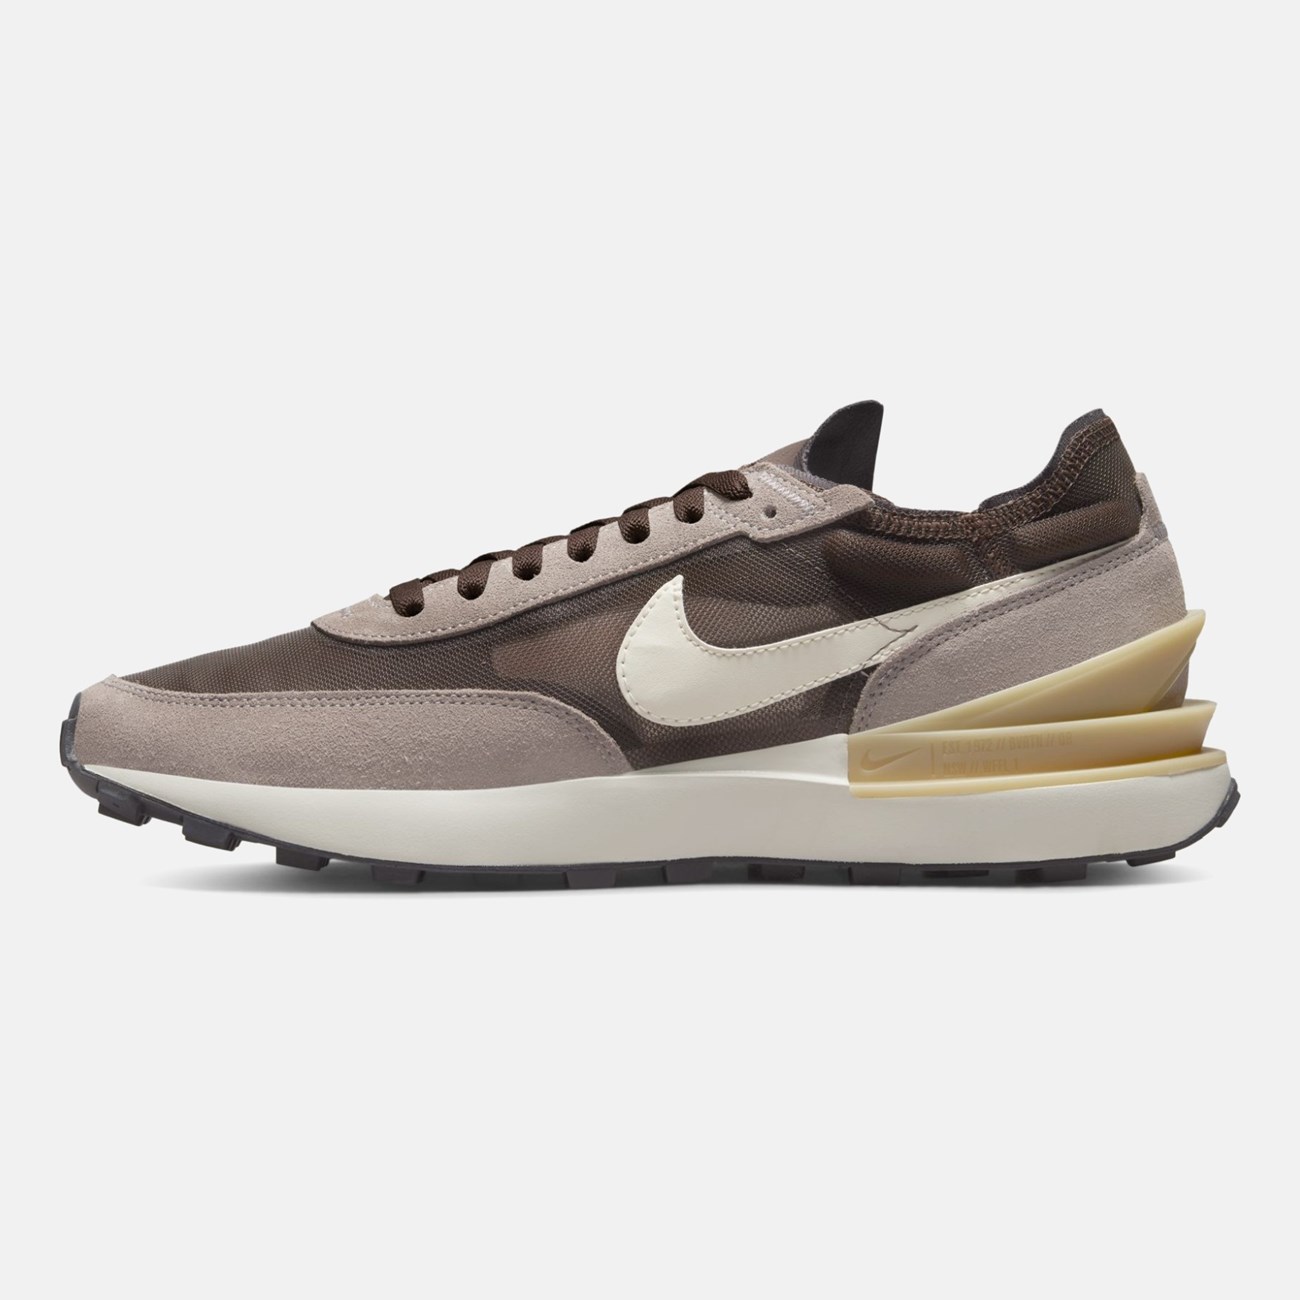 NIKE Ανδρικά Sneakers Waffle One DA7995-200 - The Athlete's Foot